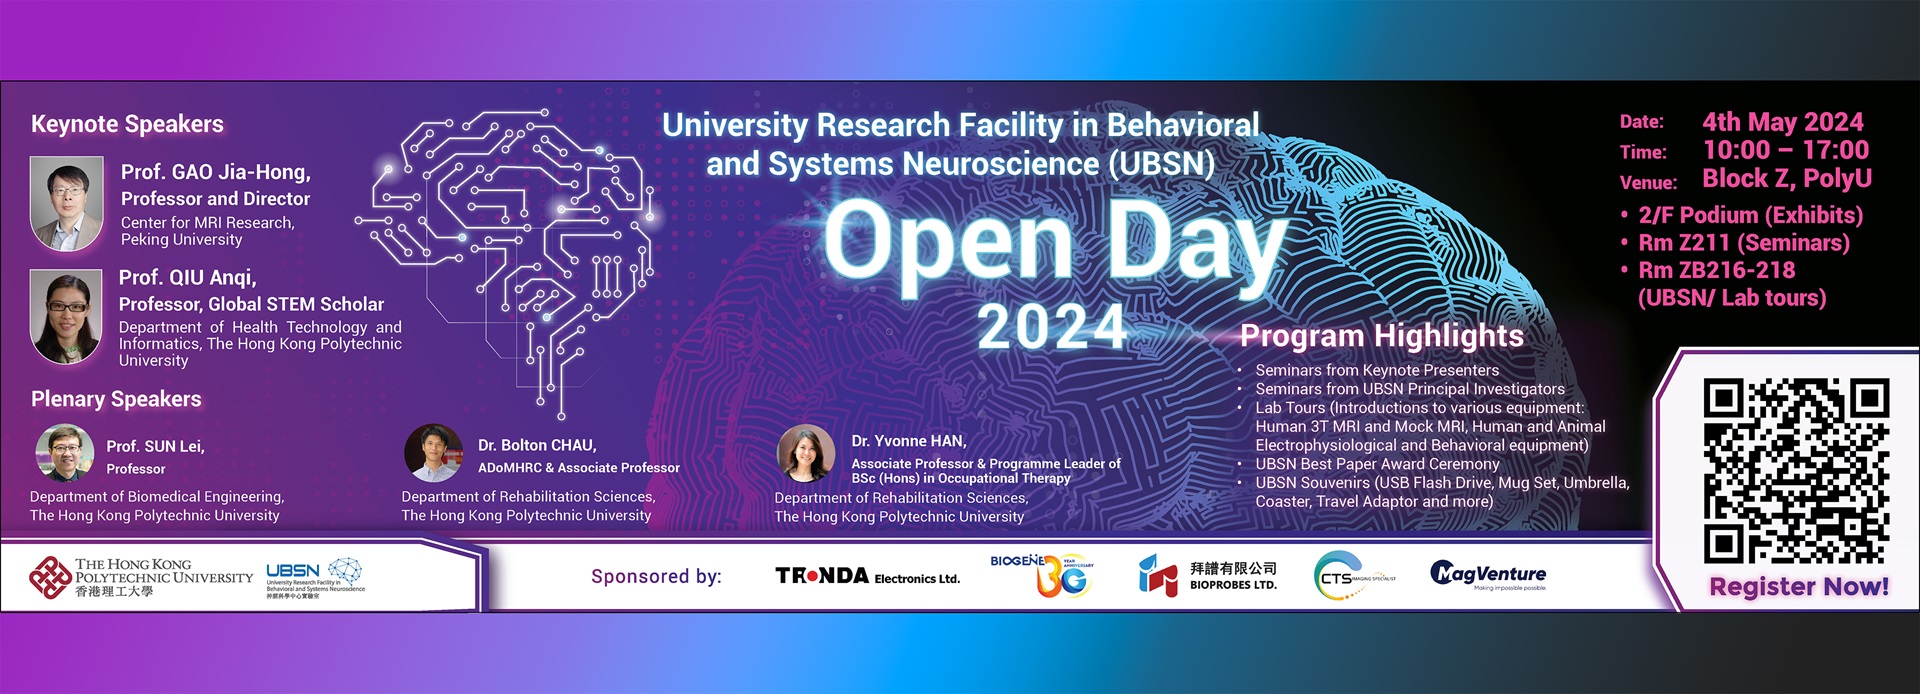 PolyU Openday Banner4 cr expanded